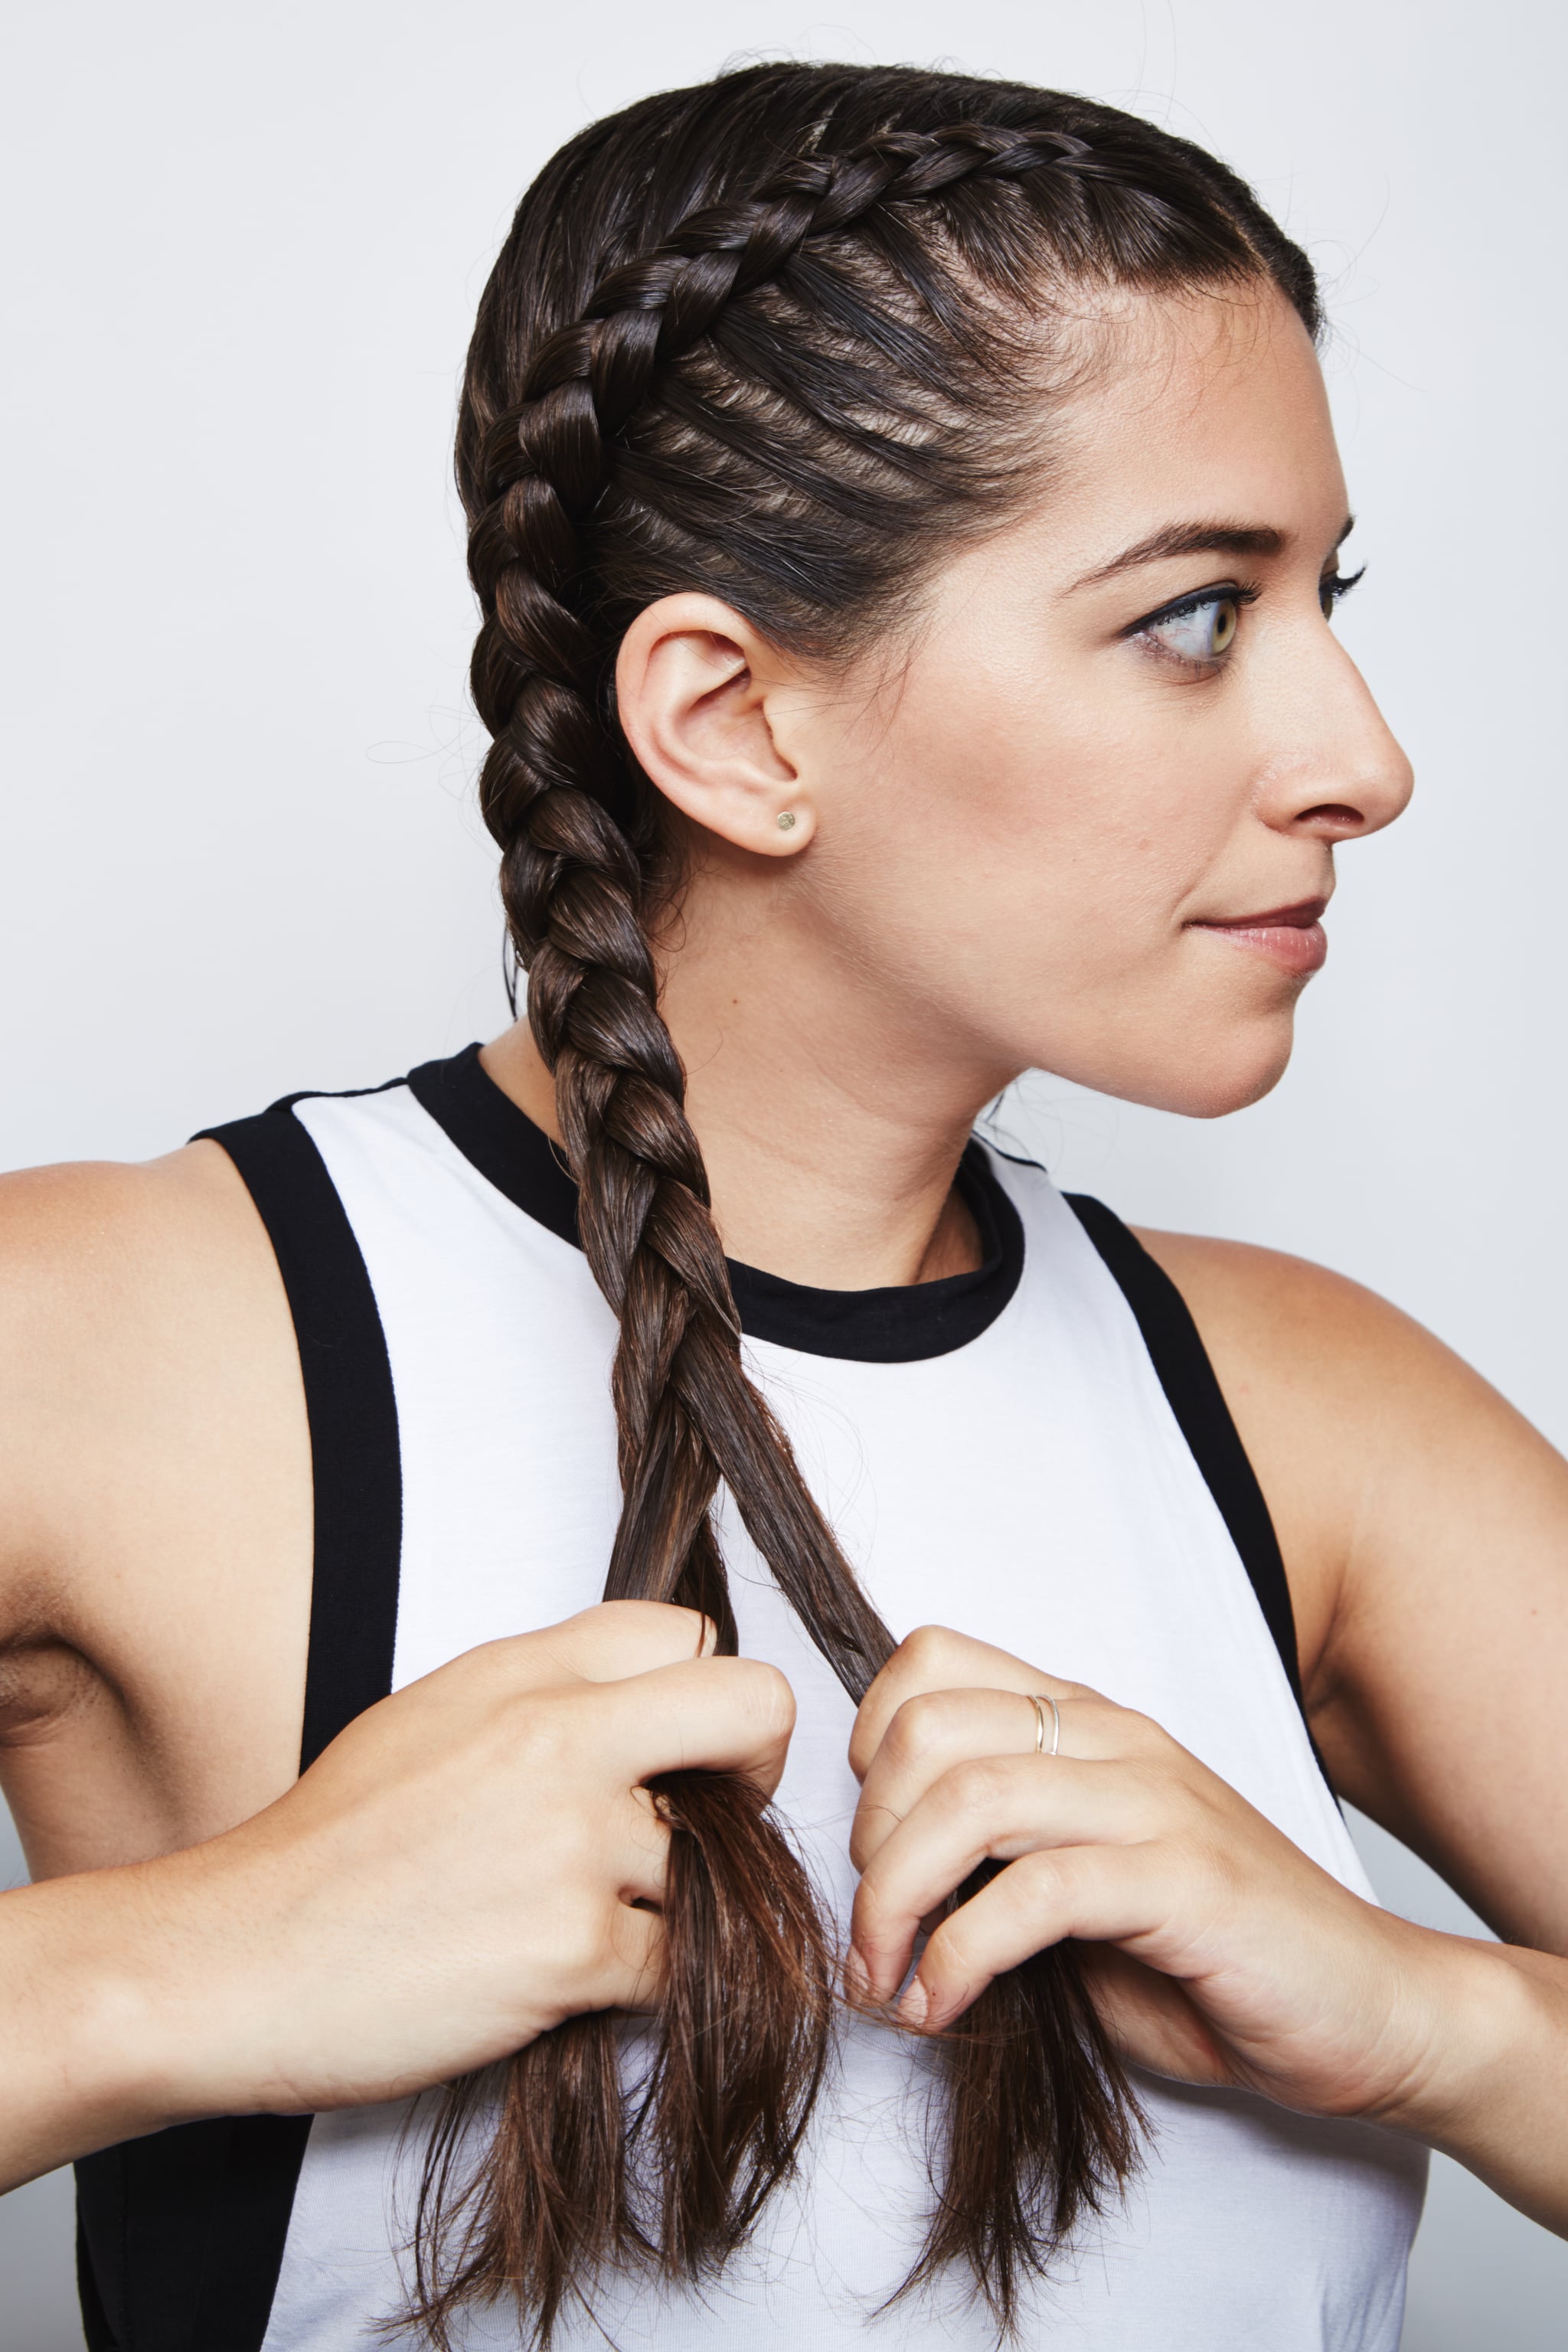 How to Do Double Dutch Braids Hairstyle on Yourself | POPSUGAR Beauty